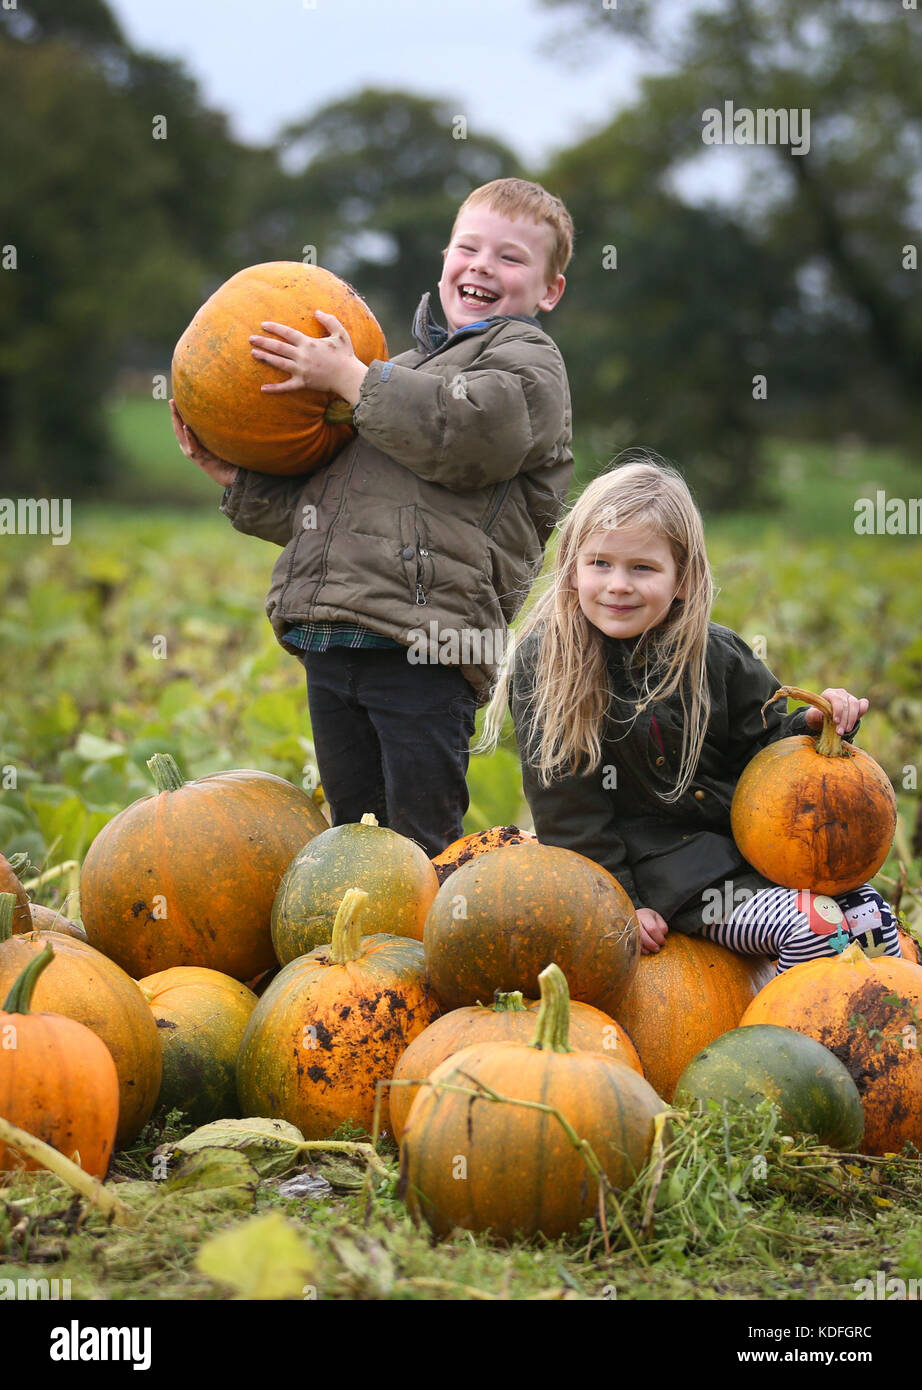 Duncan McEwen, 7, and sister Floraidh, 5, collect pumpkins on the pumpkin patch at Arnprior Farm, Stirlingshire. Stock Photo